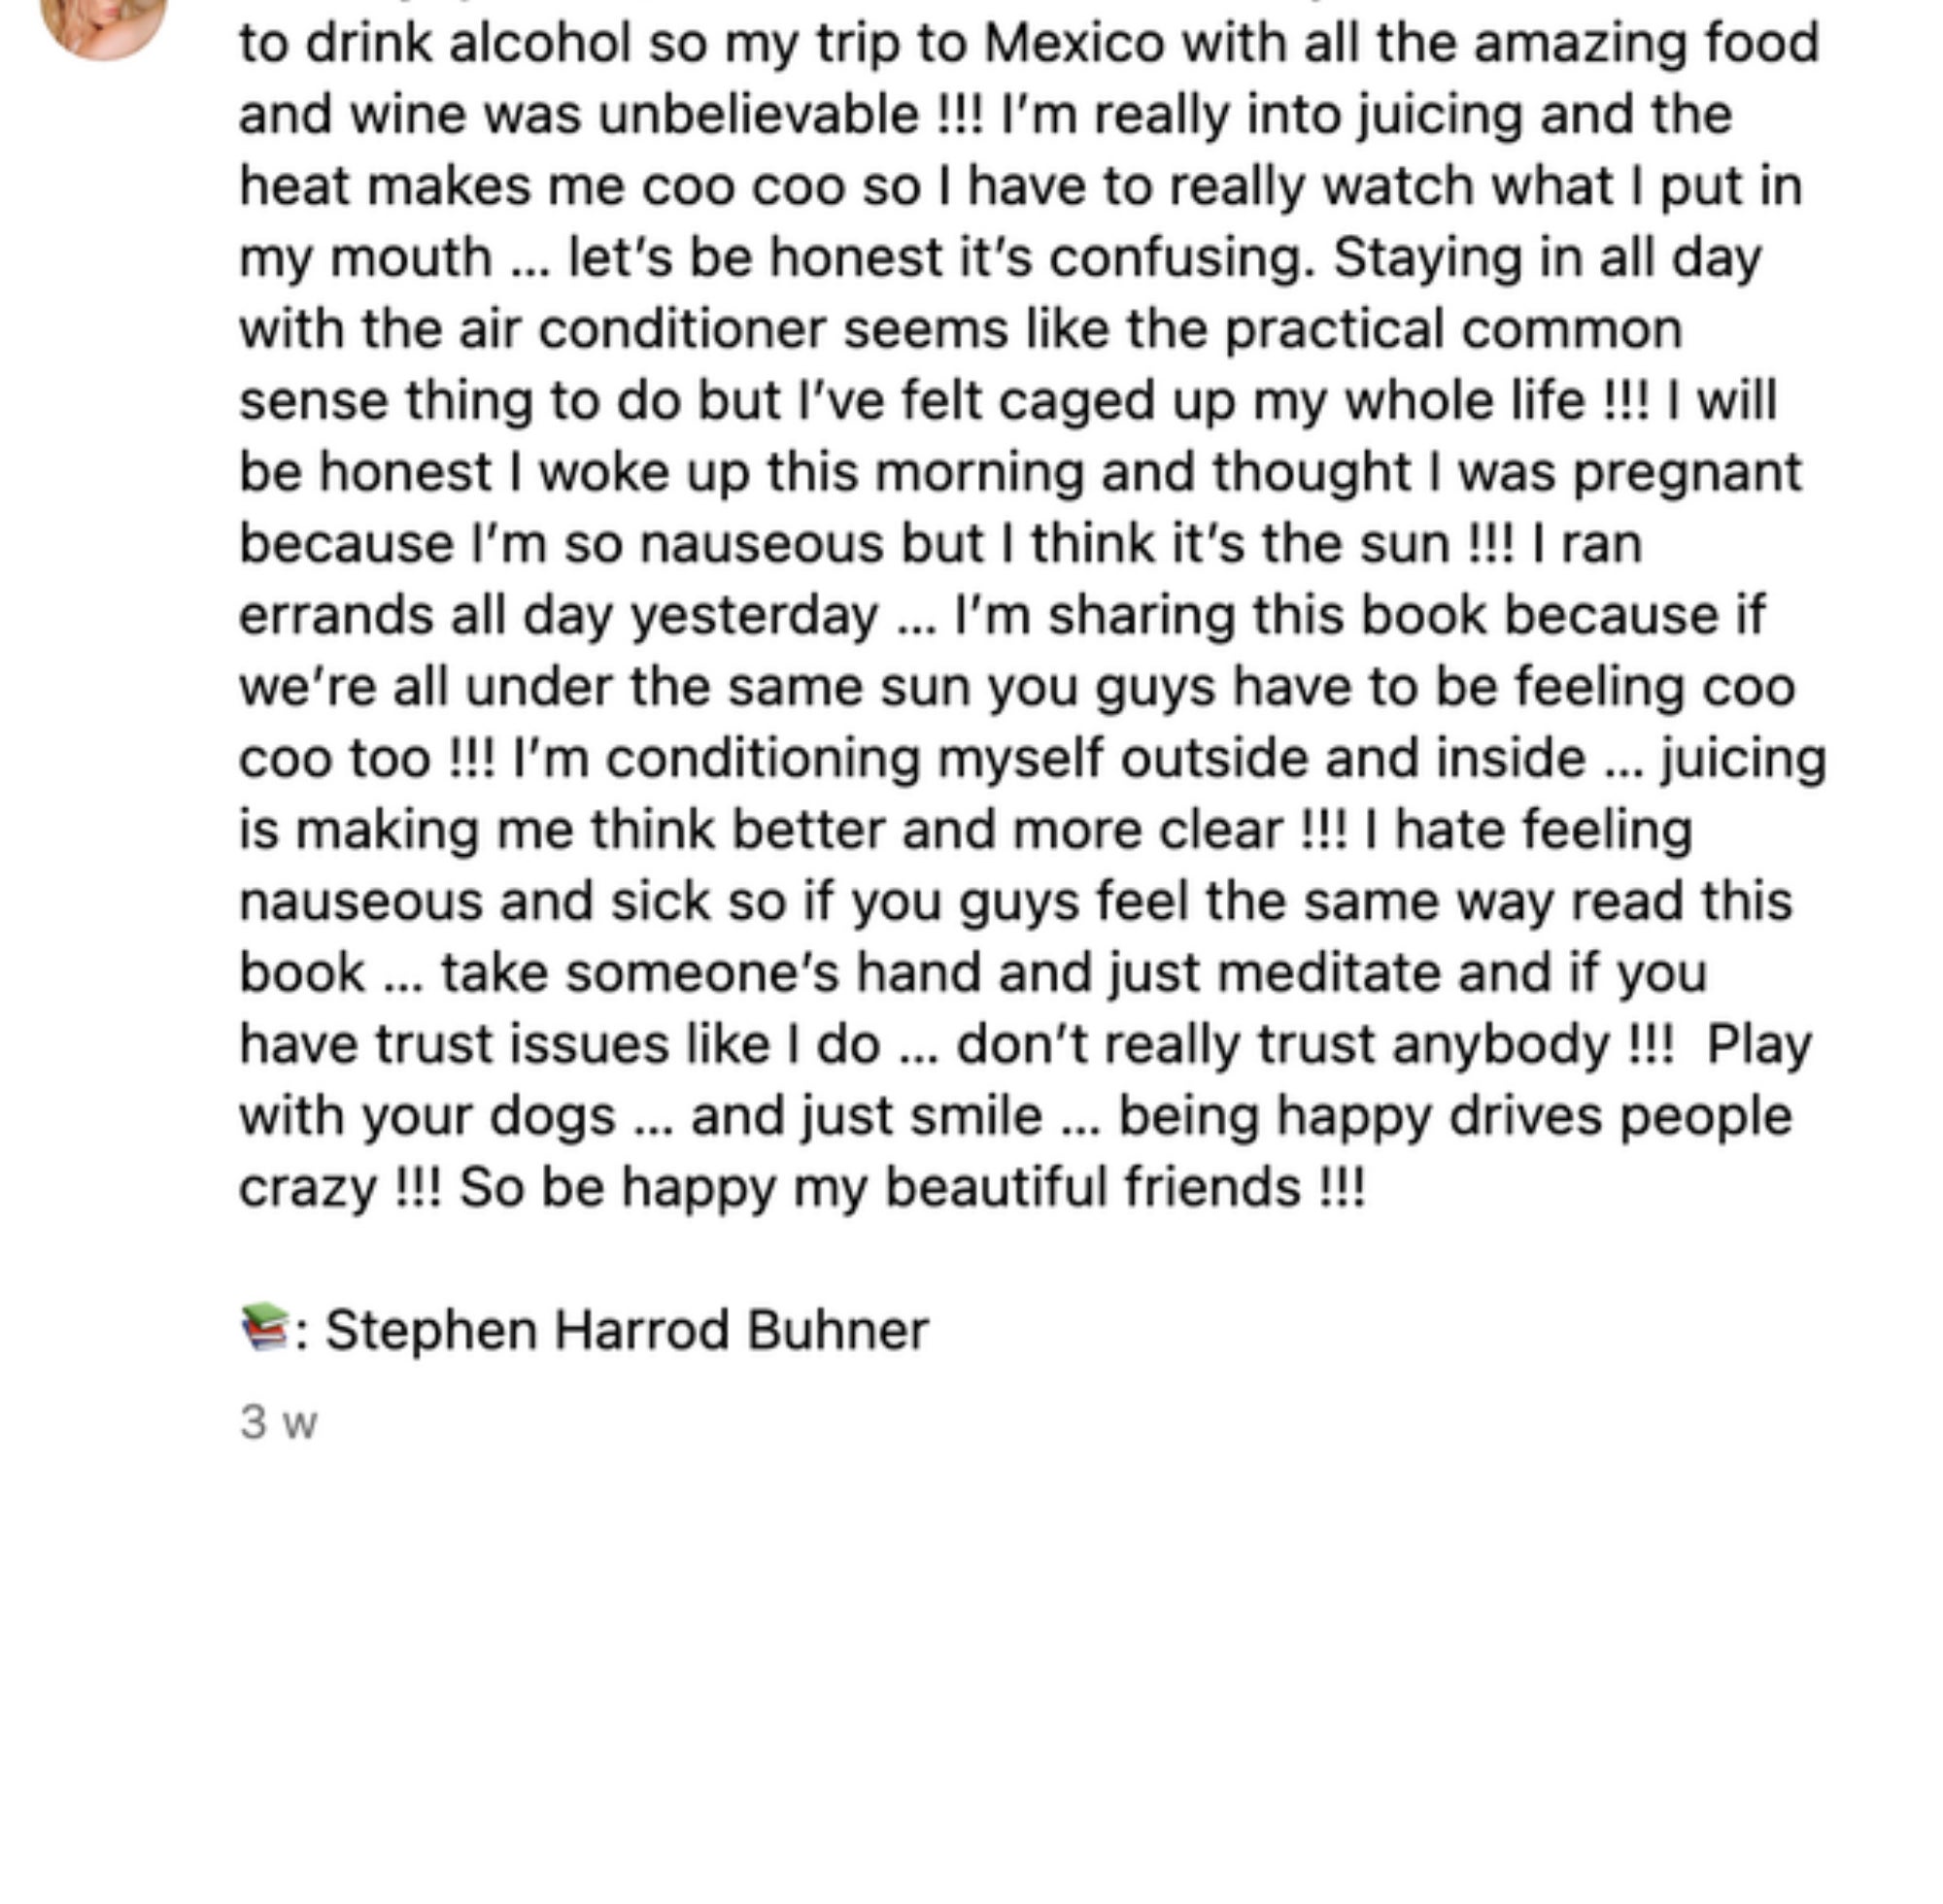 Screenshot of her comment, in which she also says &quot;it&#x27;s the first year I&#x27;ve been able to drink alcohol so my trip to Mexico with all the food and wine was unbelievable&quot;